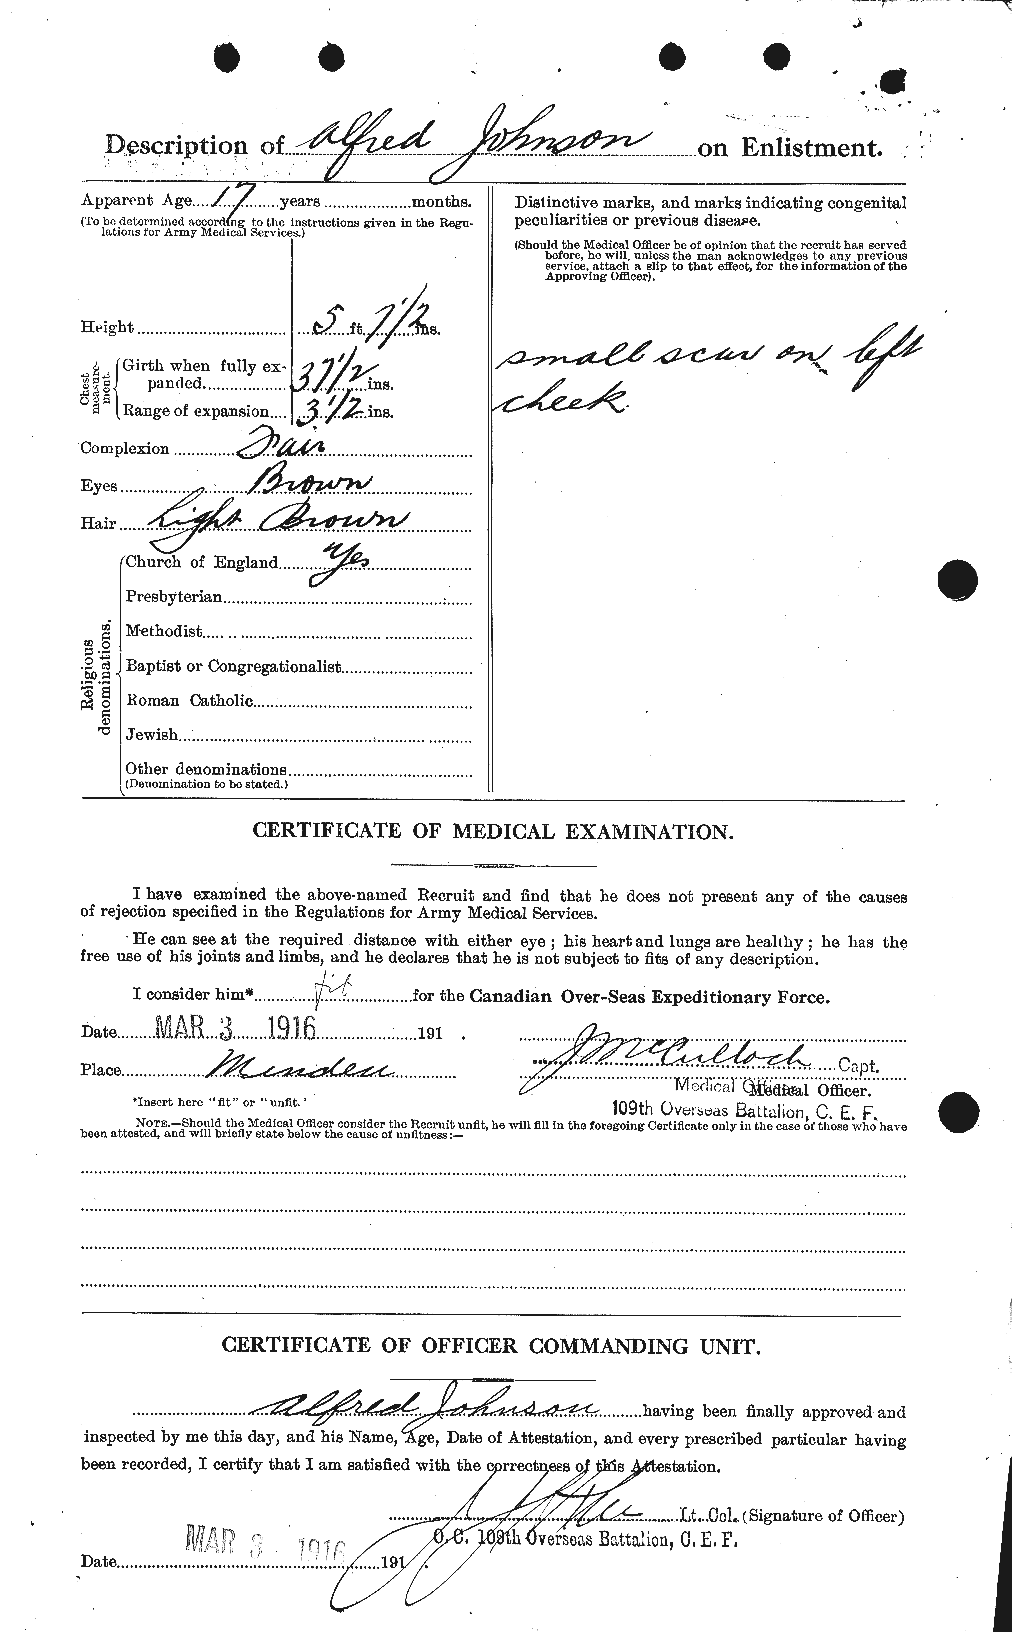 Personnel Records of the First World War - CEF 421192b